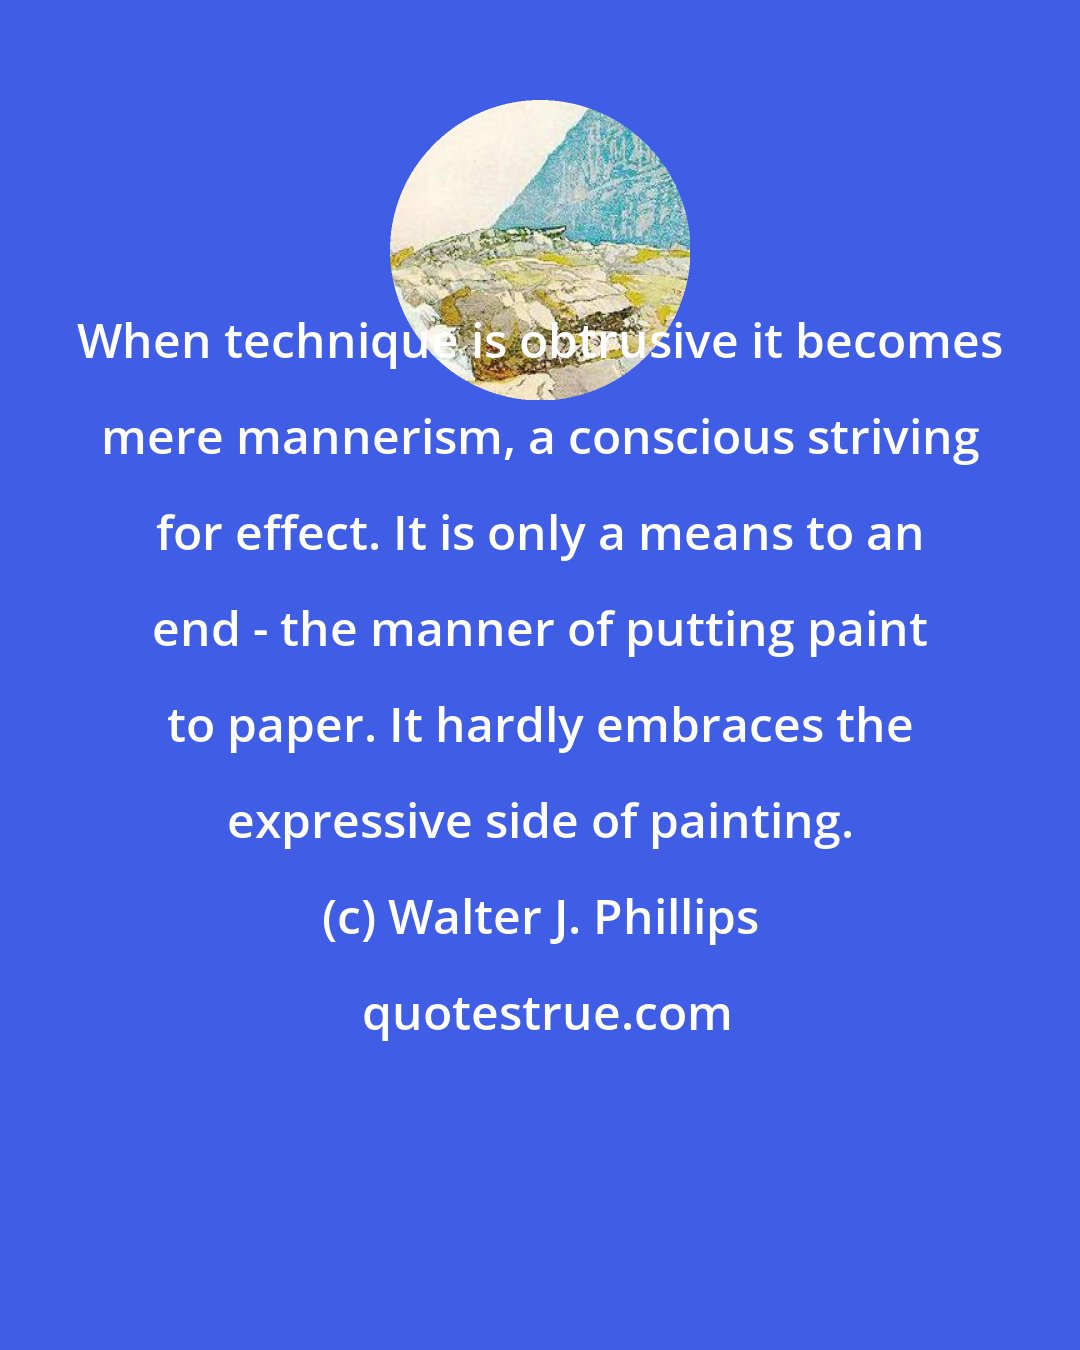 Walter J. Phillips: When technique is obtrusive it becomes mere mannerism, a conscious striving for effect. It is only a means to an end - the manner of putting paint to paper. It hardly embraces the expressive side of painting.